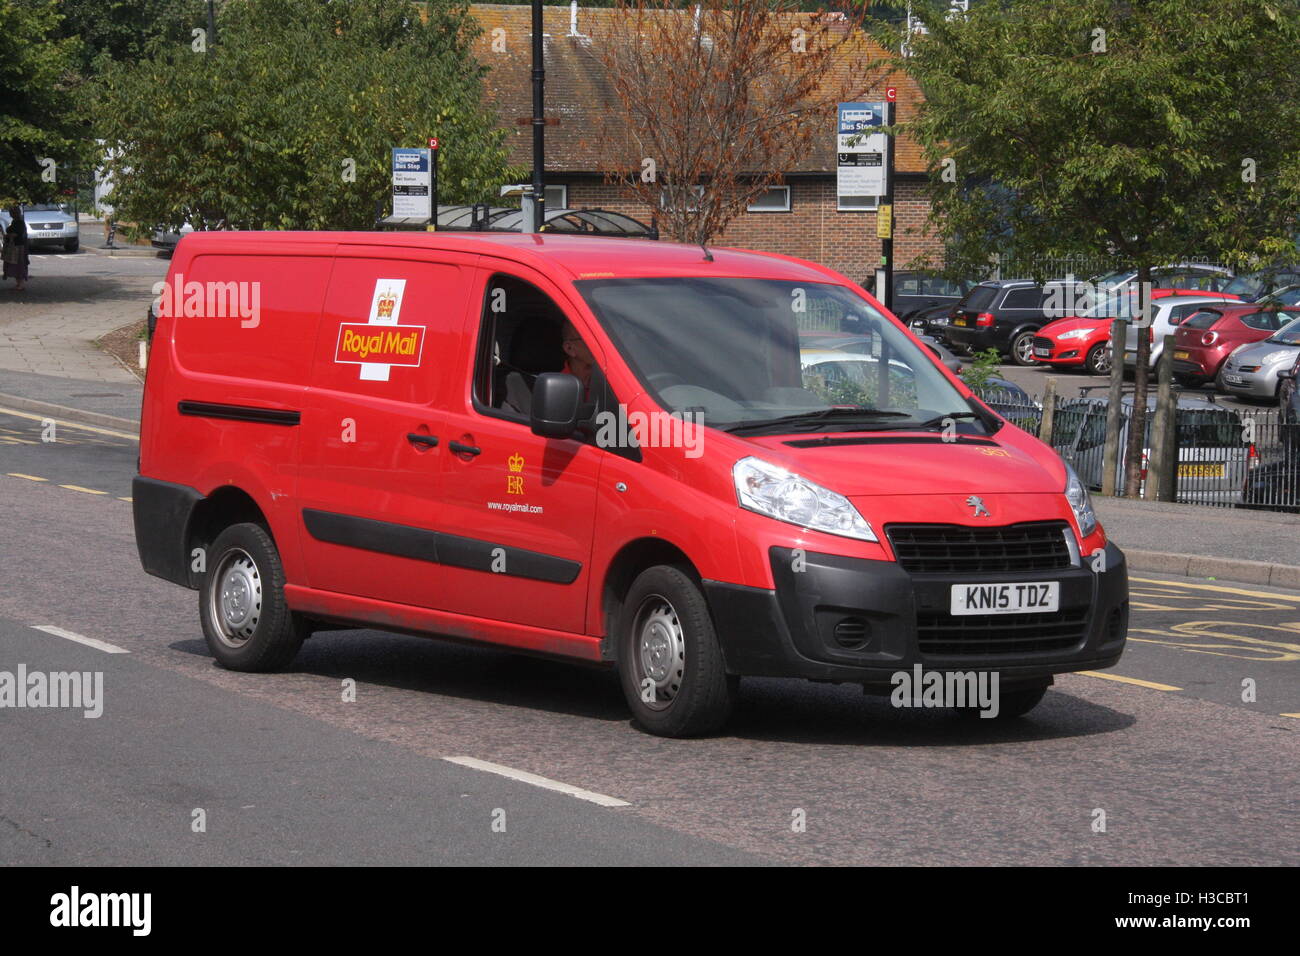 Peugeot Van High Resolution Stock Photography and Images - Alamy